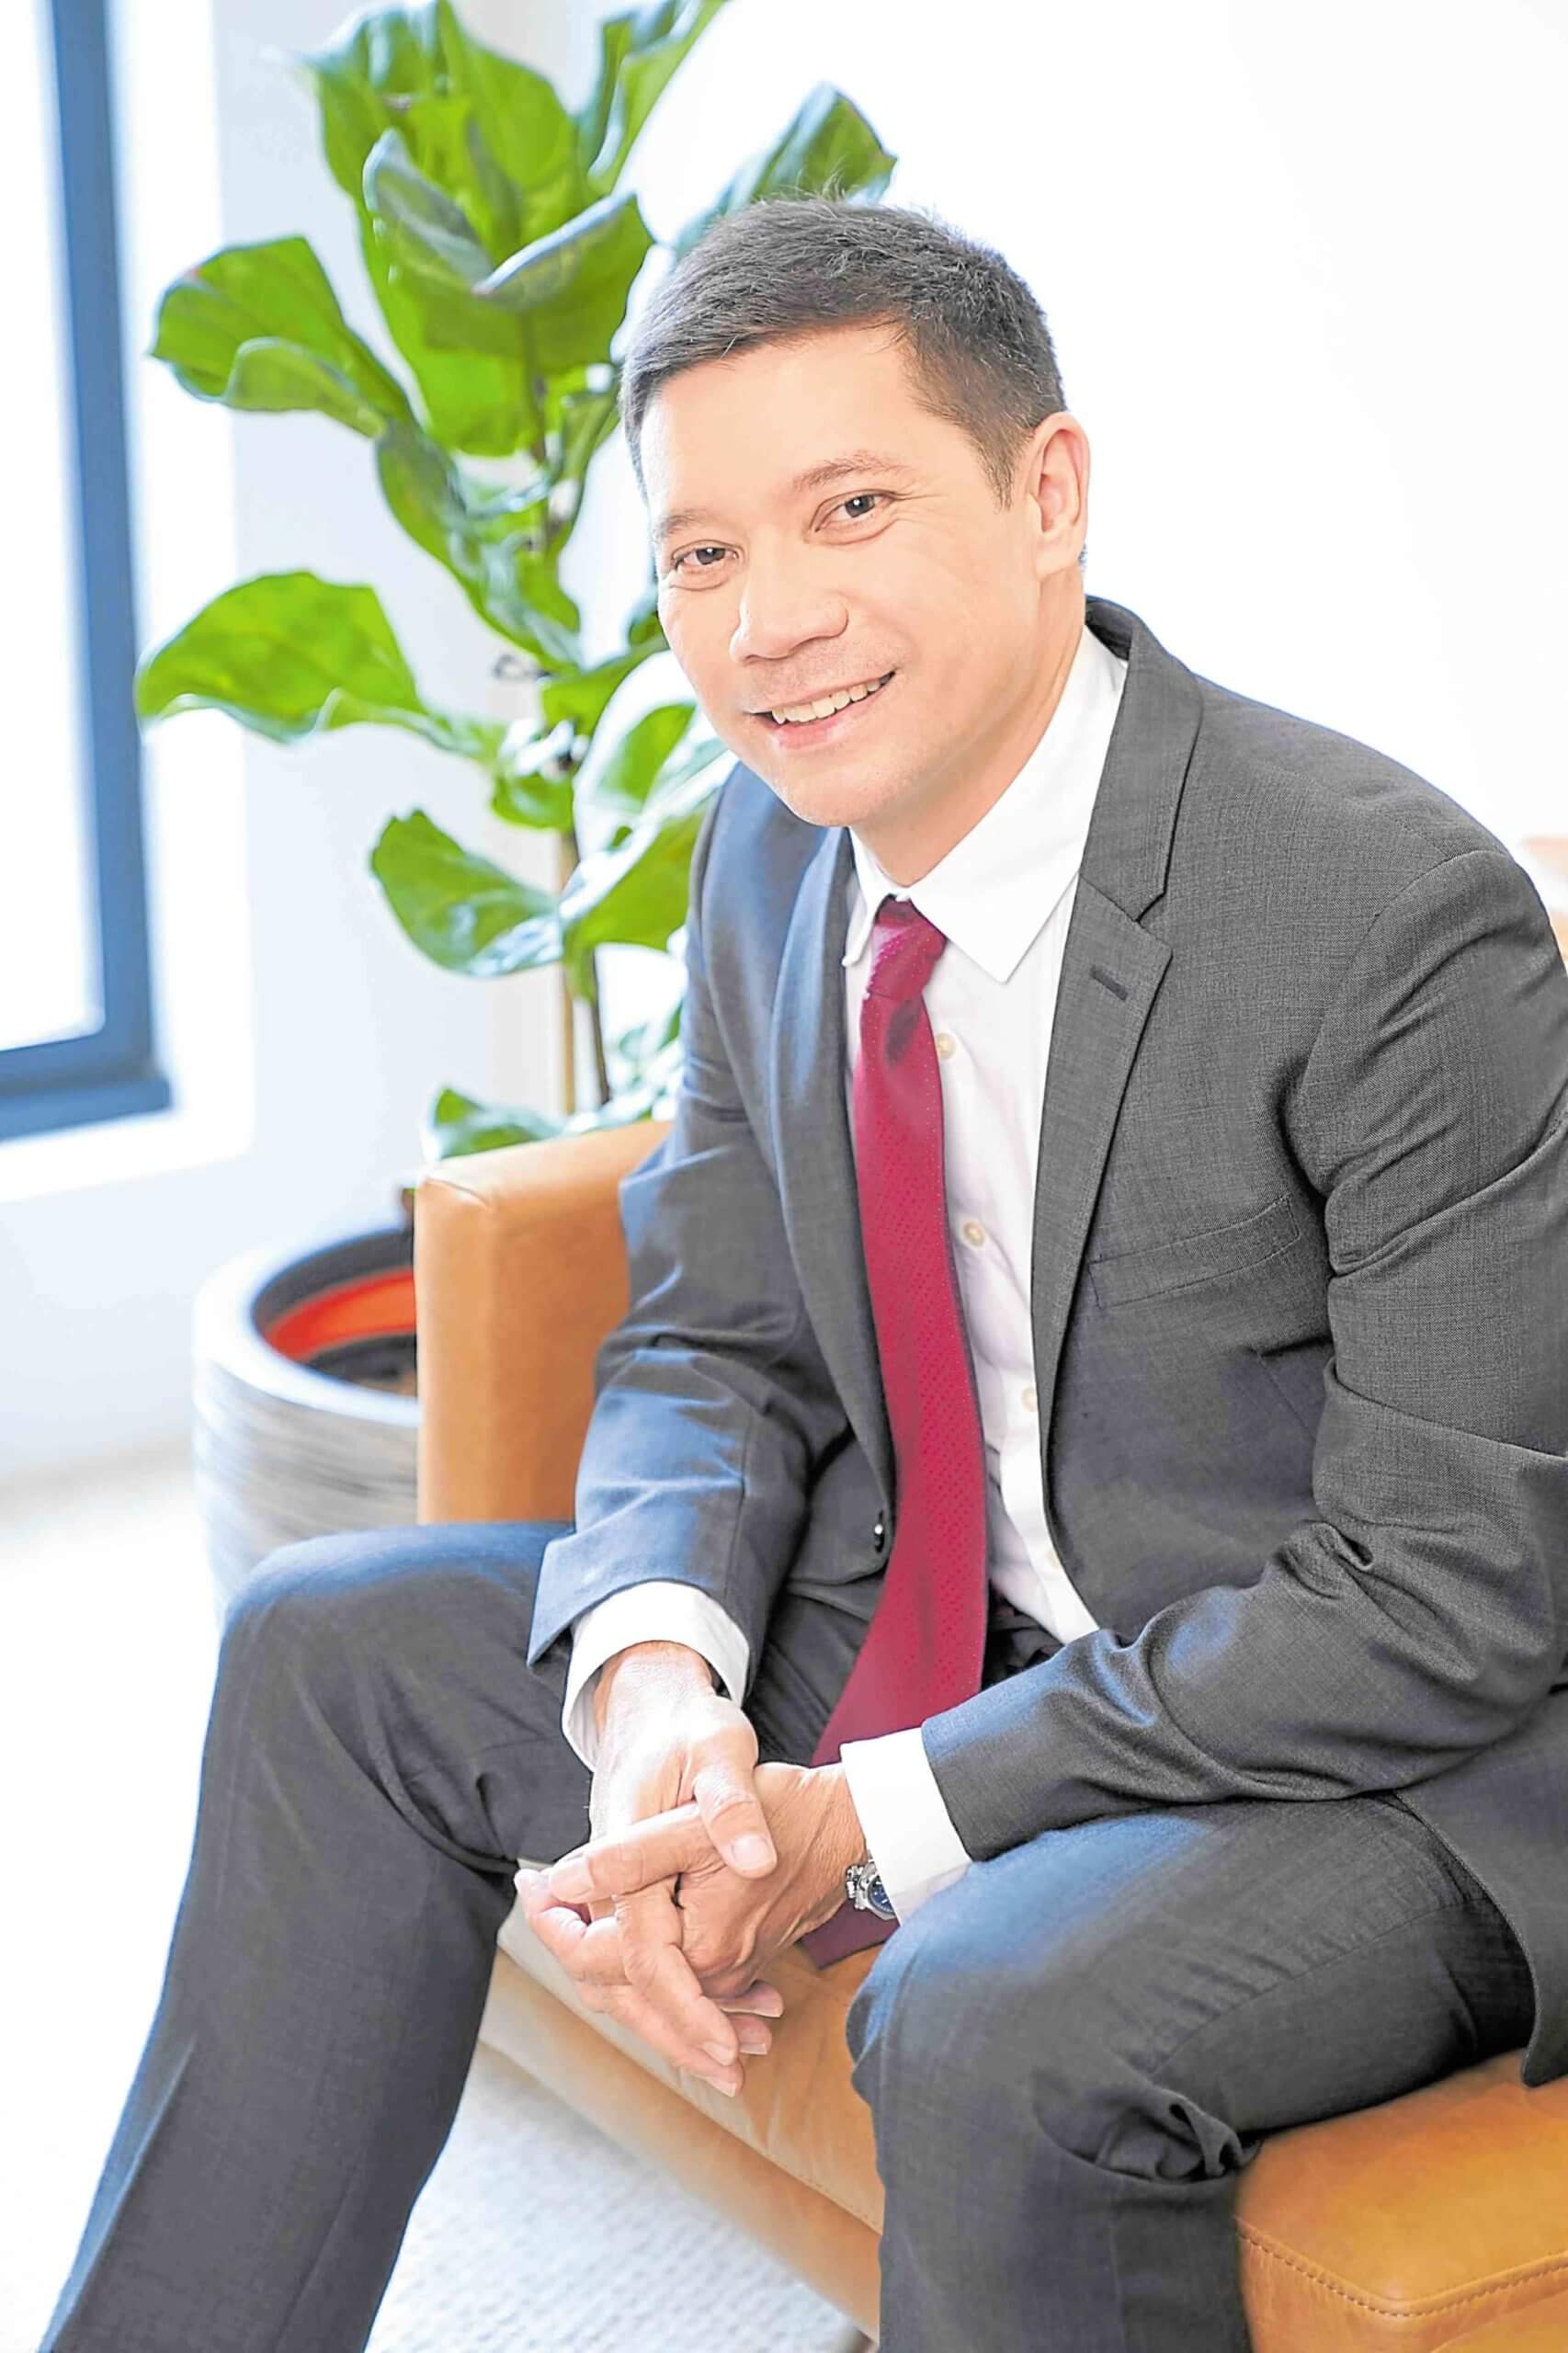 REAL GROWTH AND RETURNS IN REAL ESTATE: Tomas P. Lorenzo CEO, Torre Lorenzo Development Corp.